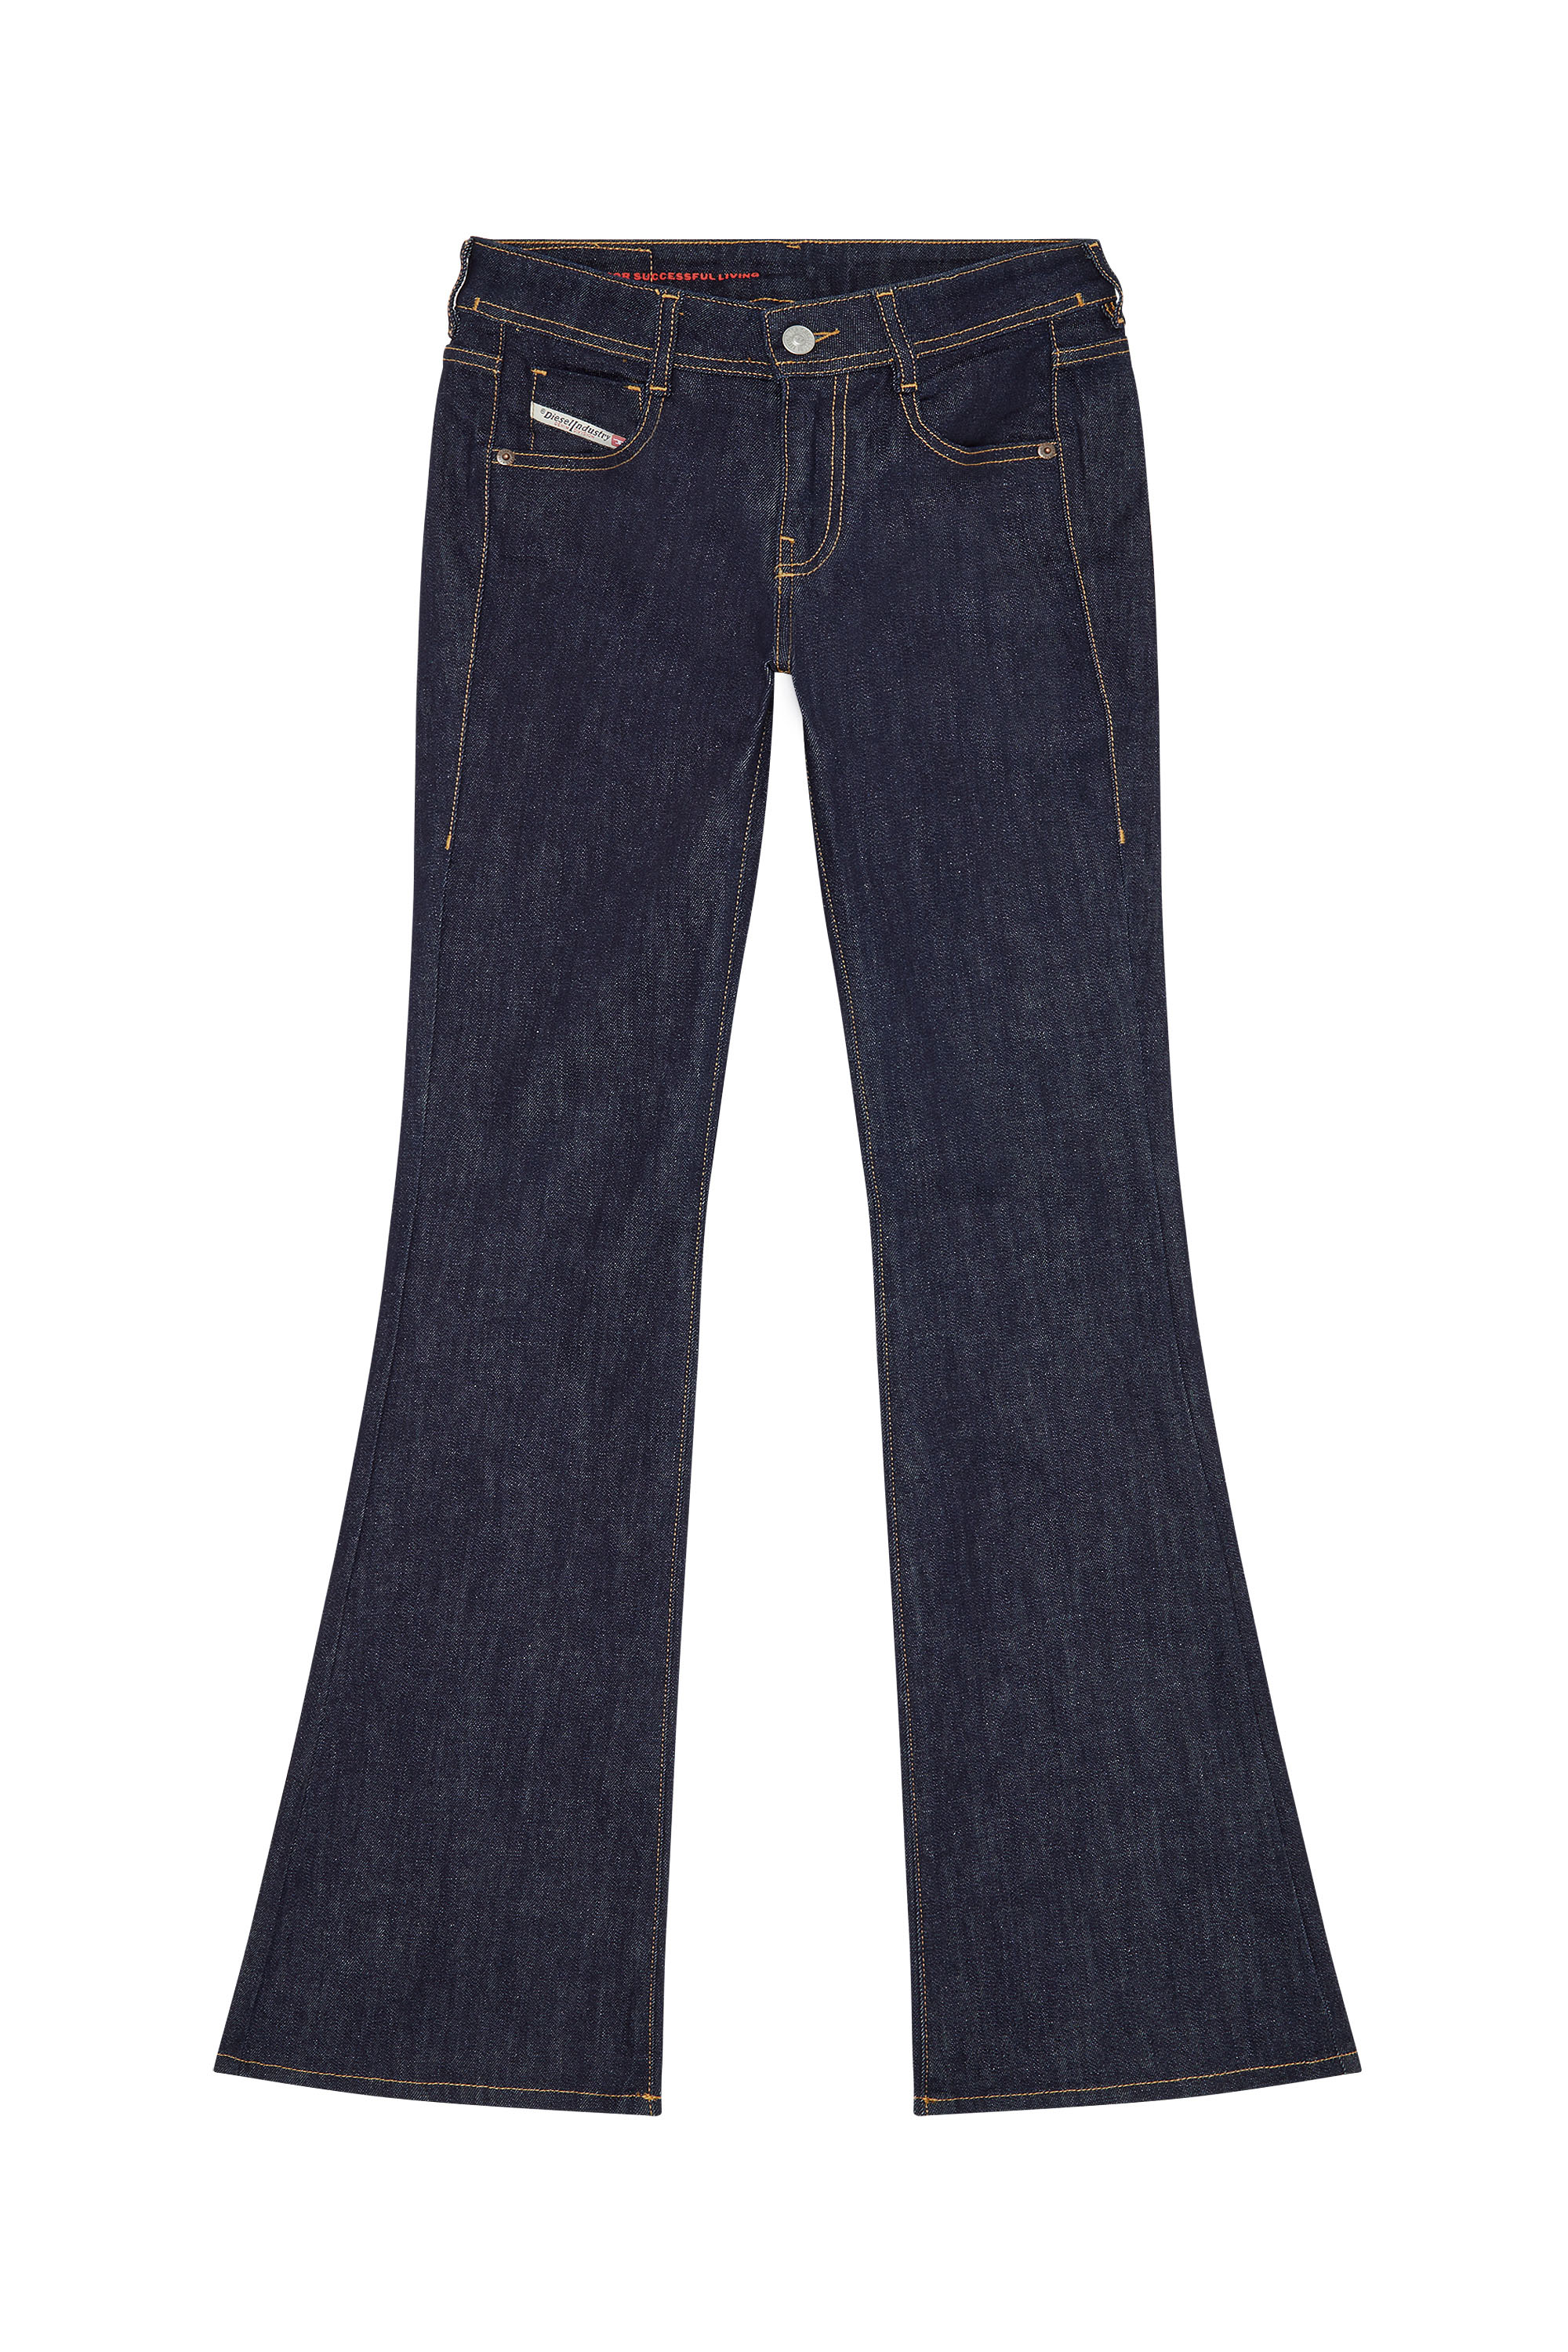 1969 D-Ebbey Z9B89 Bootcut and Flare Jeans, Dunkelblau - Jeans